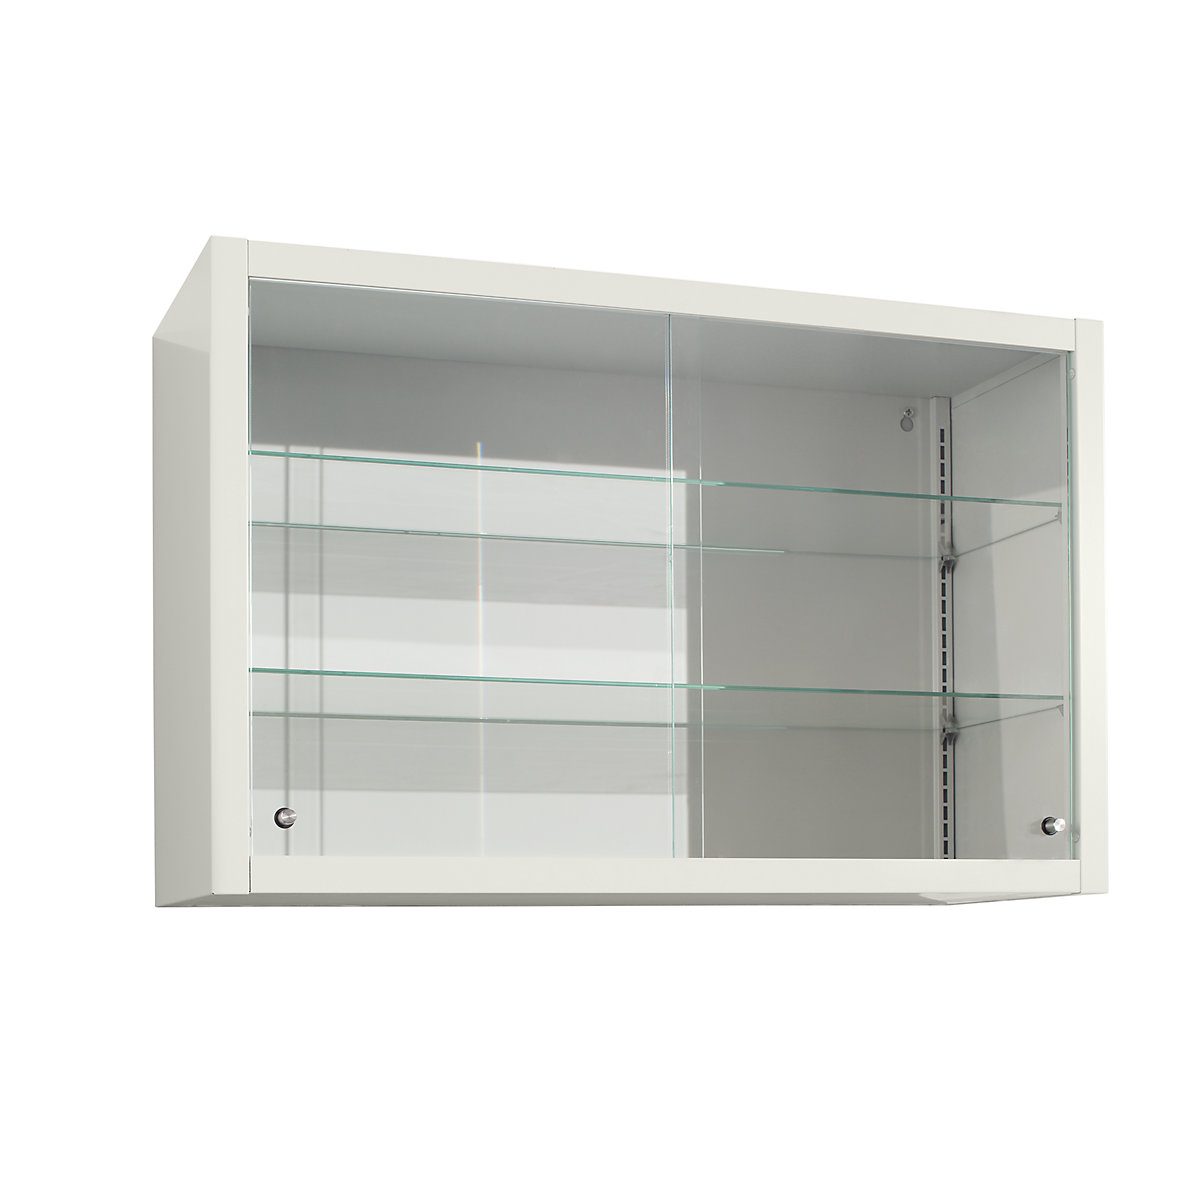 mauser – First aid cupboard, 2 sliding doors, 2 shelves, pure white